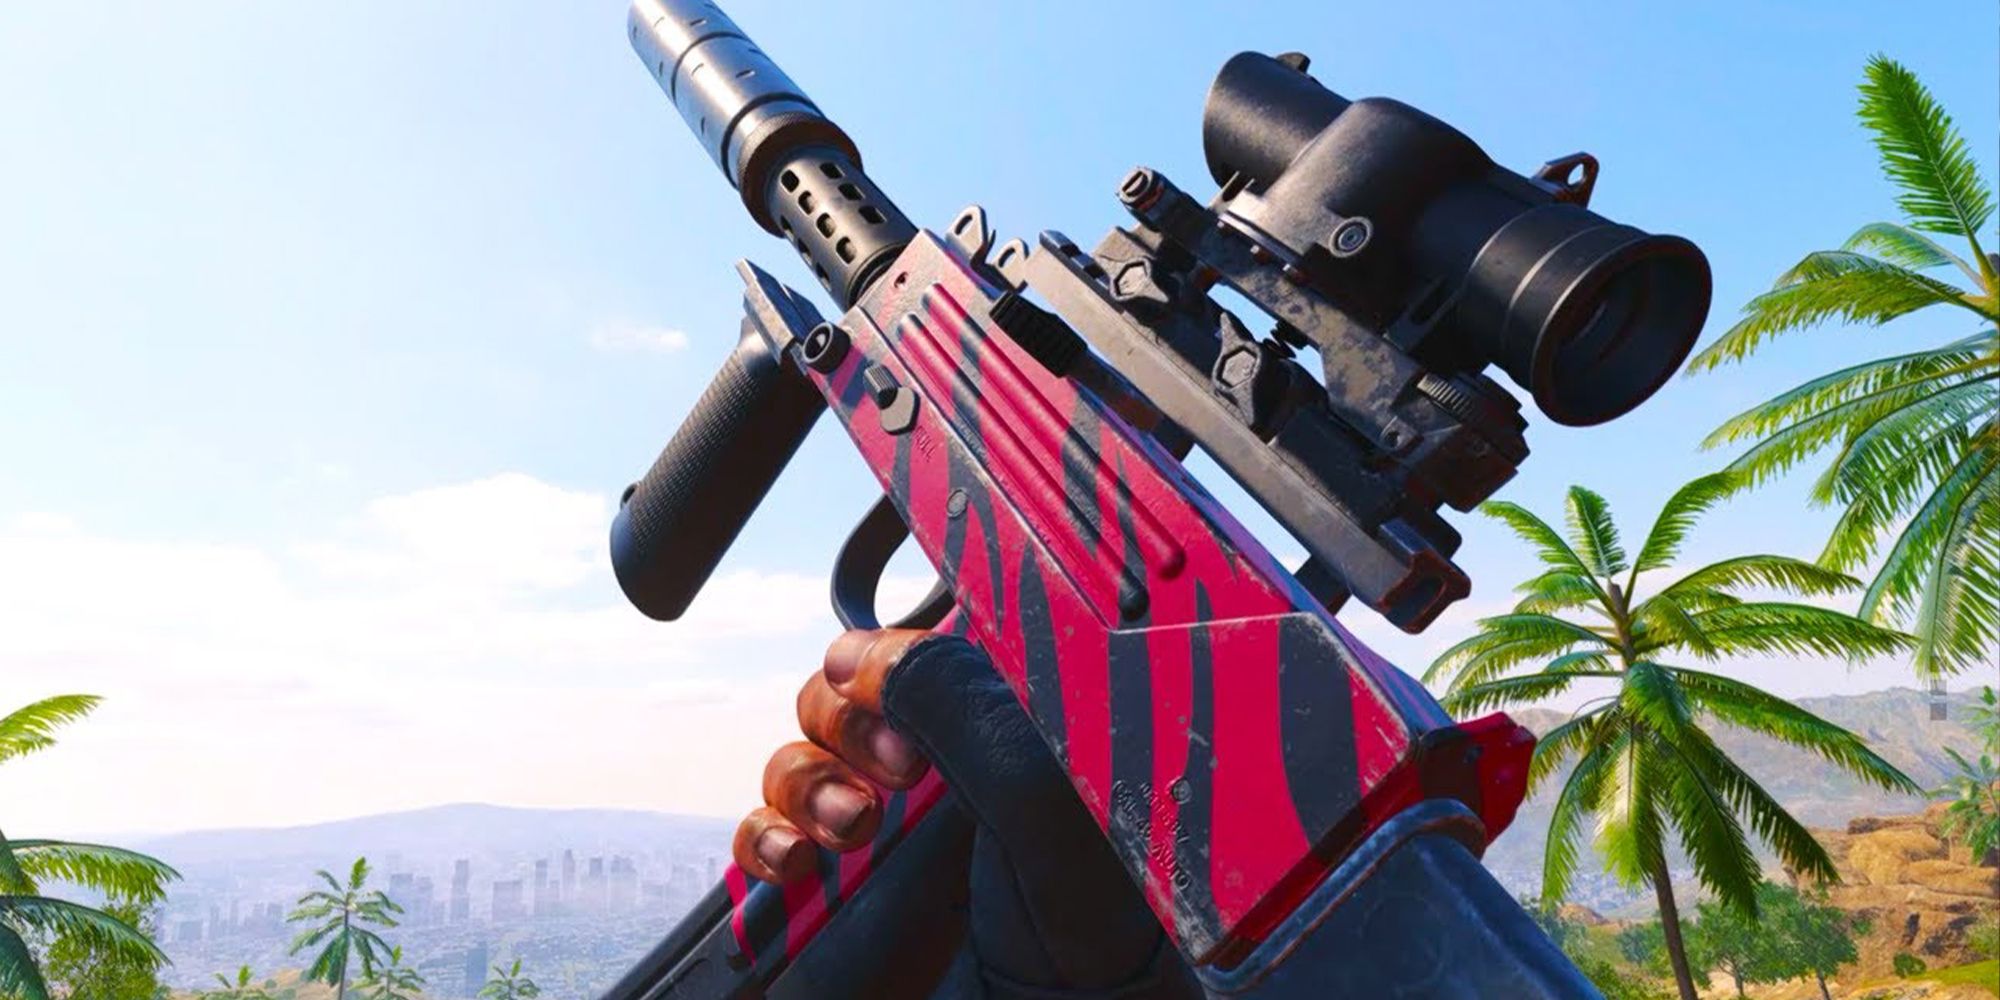 Character pointing the Mac 10 towards the sky